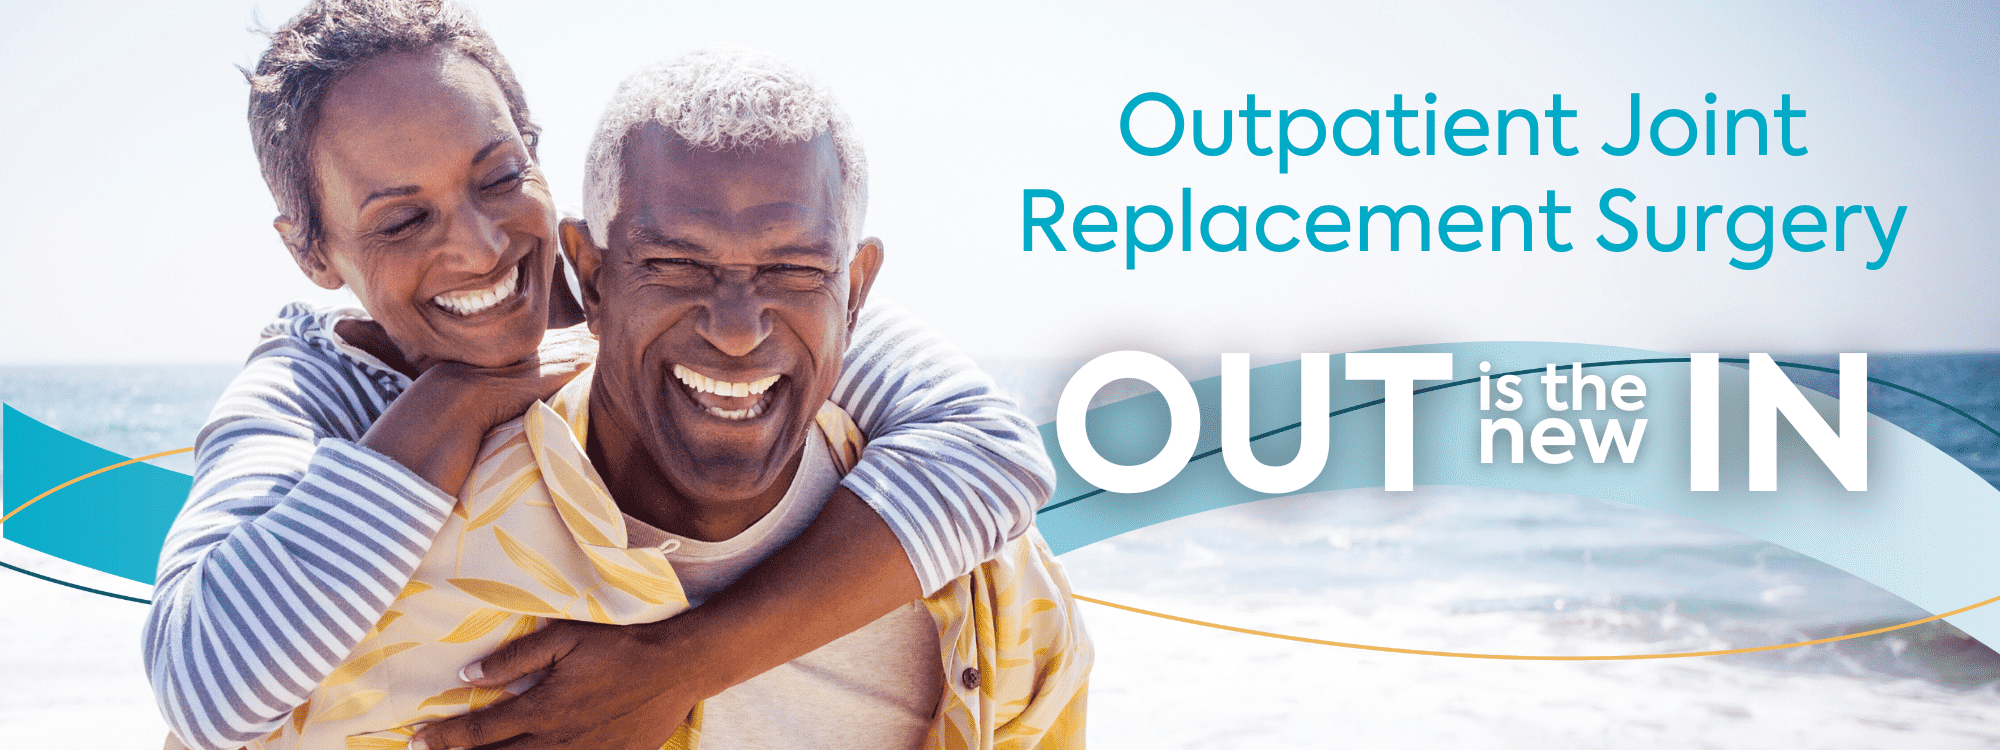 Outpatient Joint Replacement Surgery, Out is the New IN